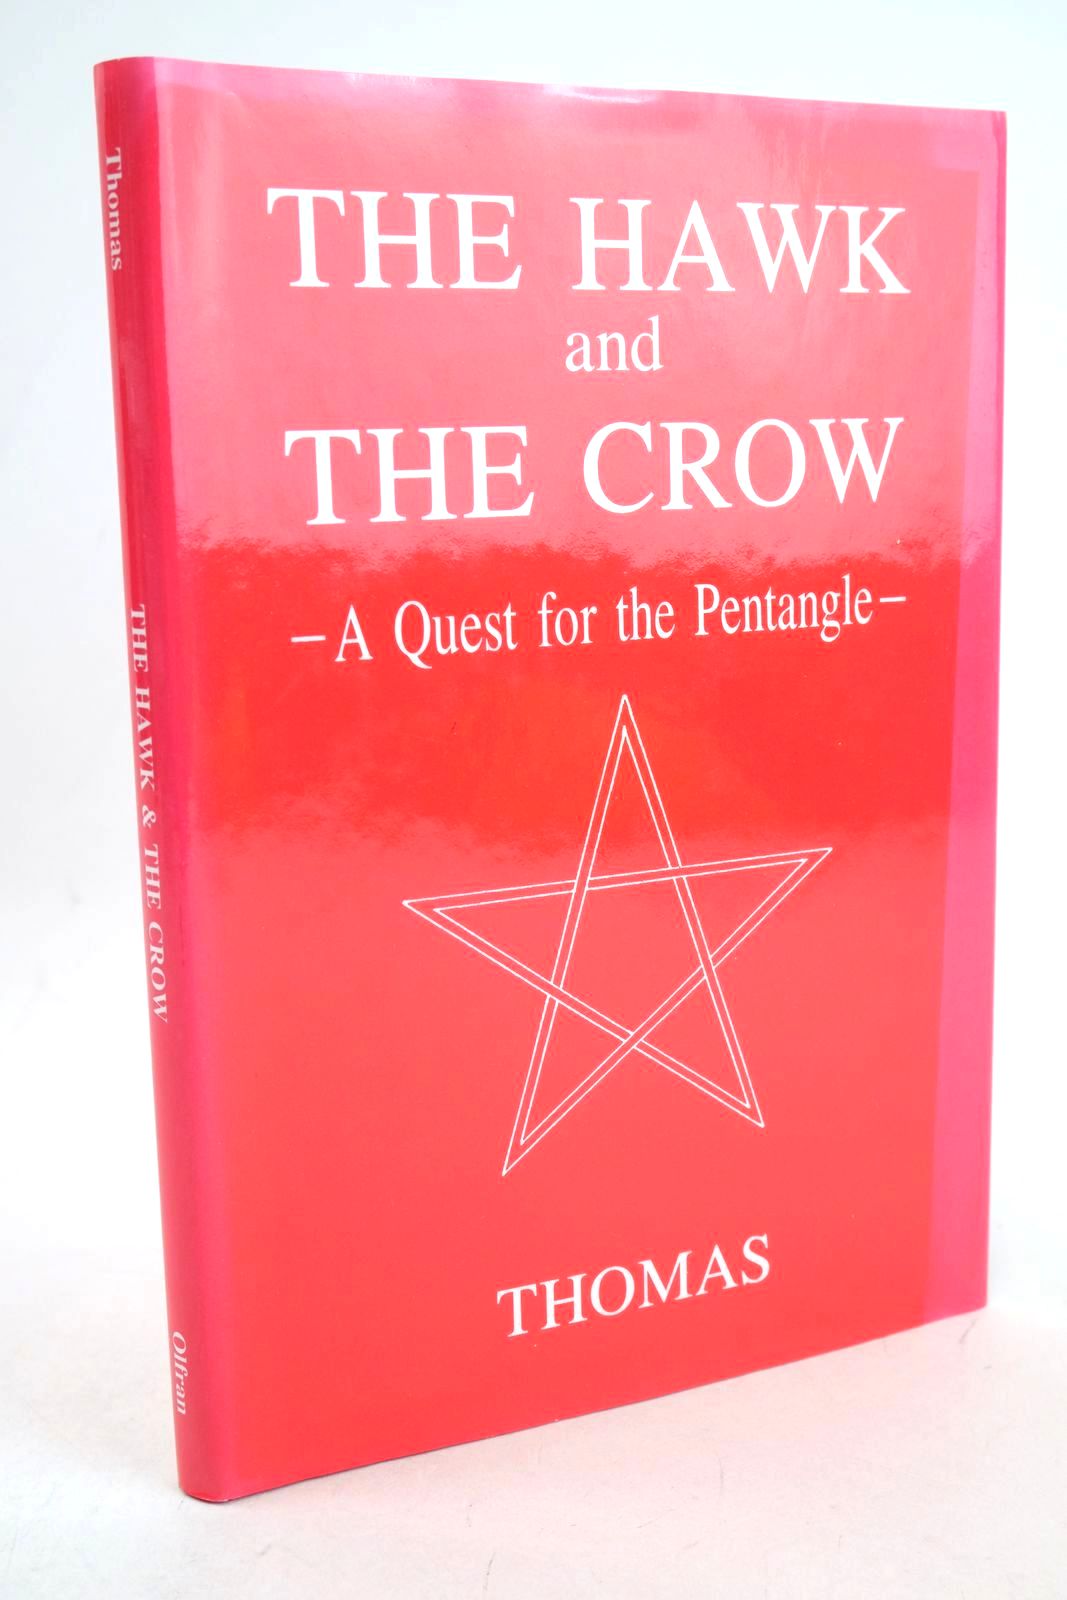 Photo of THE HAWK AND THE CROW: A QUEST FOR THE PENTANGLE published by Olfran Books (STOCK CODE: 1326903)  for sale by Stella & Rose's Books